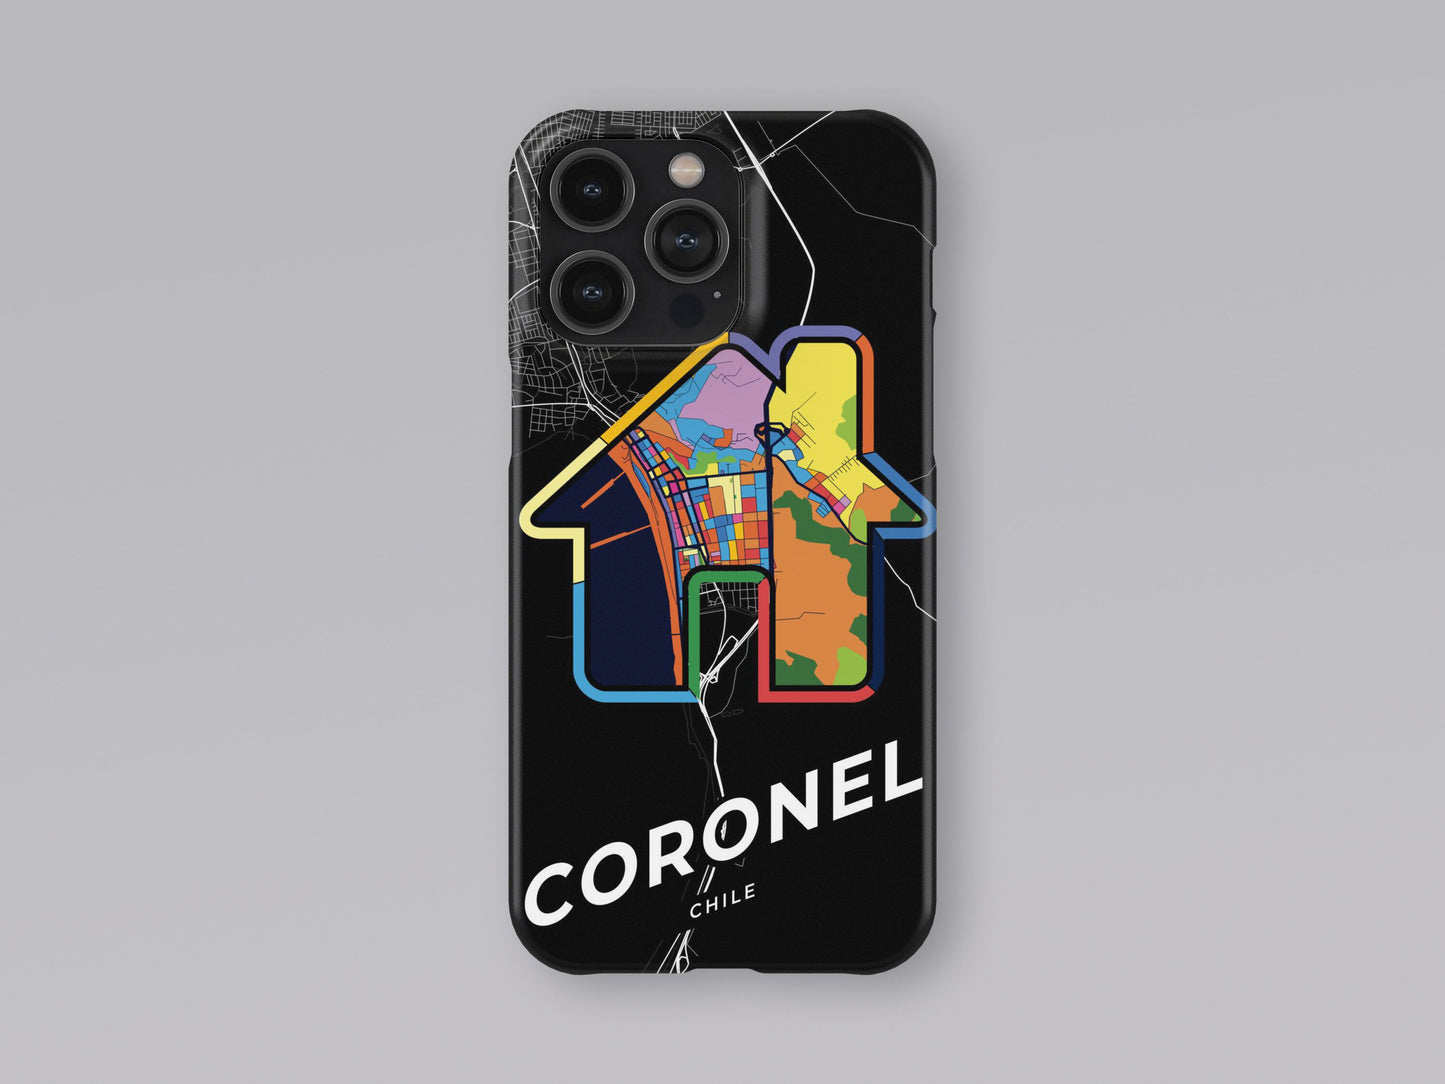 Coronel Chile slim phone case with colorful icon. Birthday, wedding or housewarming gift. Couple match cases. 3